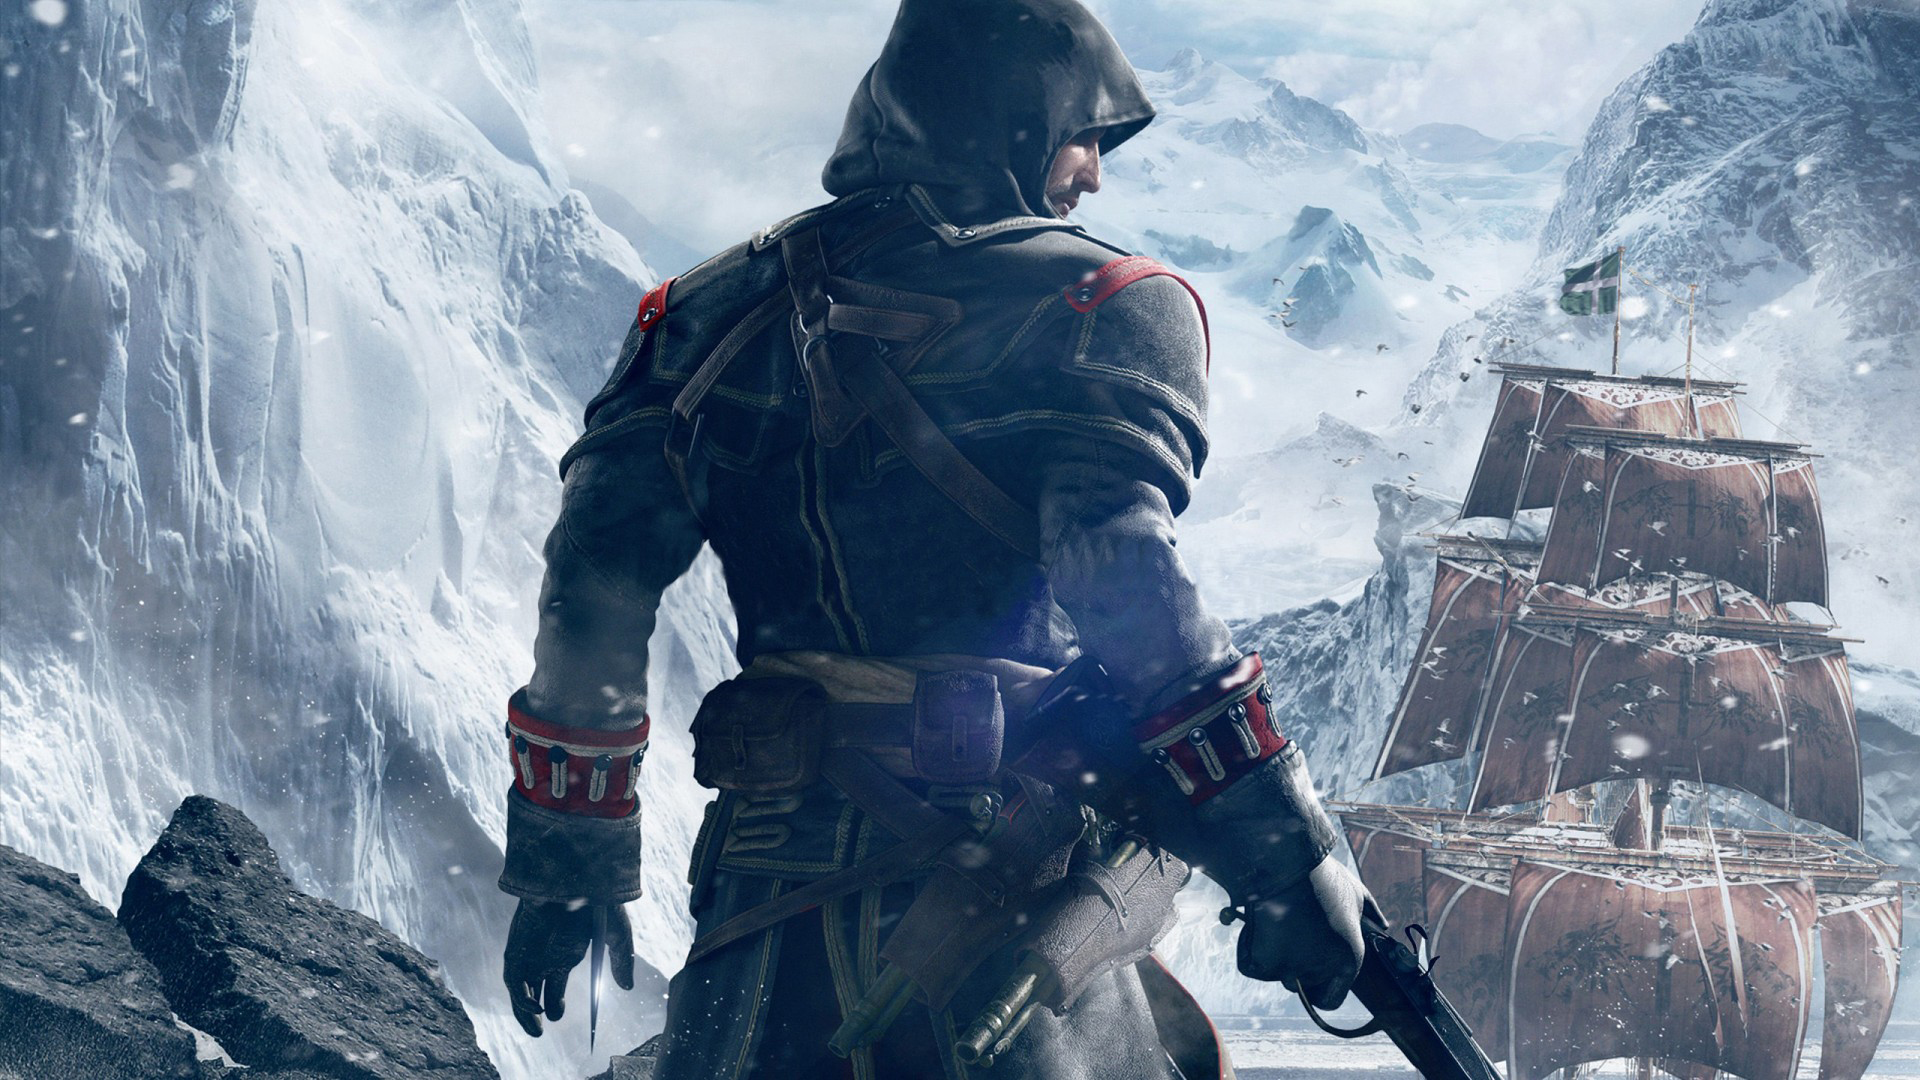 Assassins Creed Hd Wallpapers Collection - Assassin's Creed Rogue Remaster - HD Wallpaper 